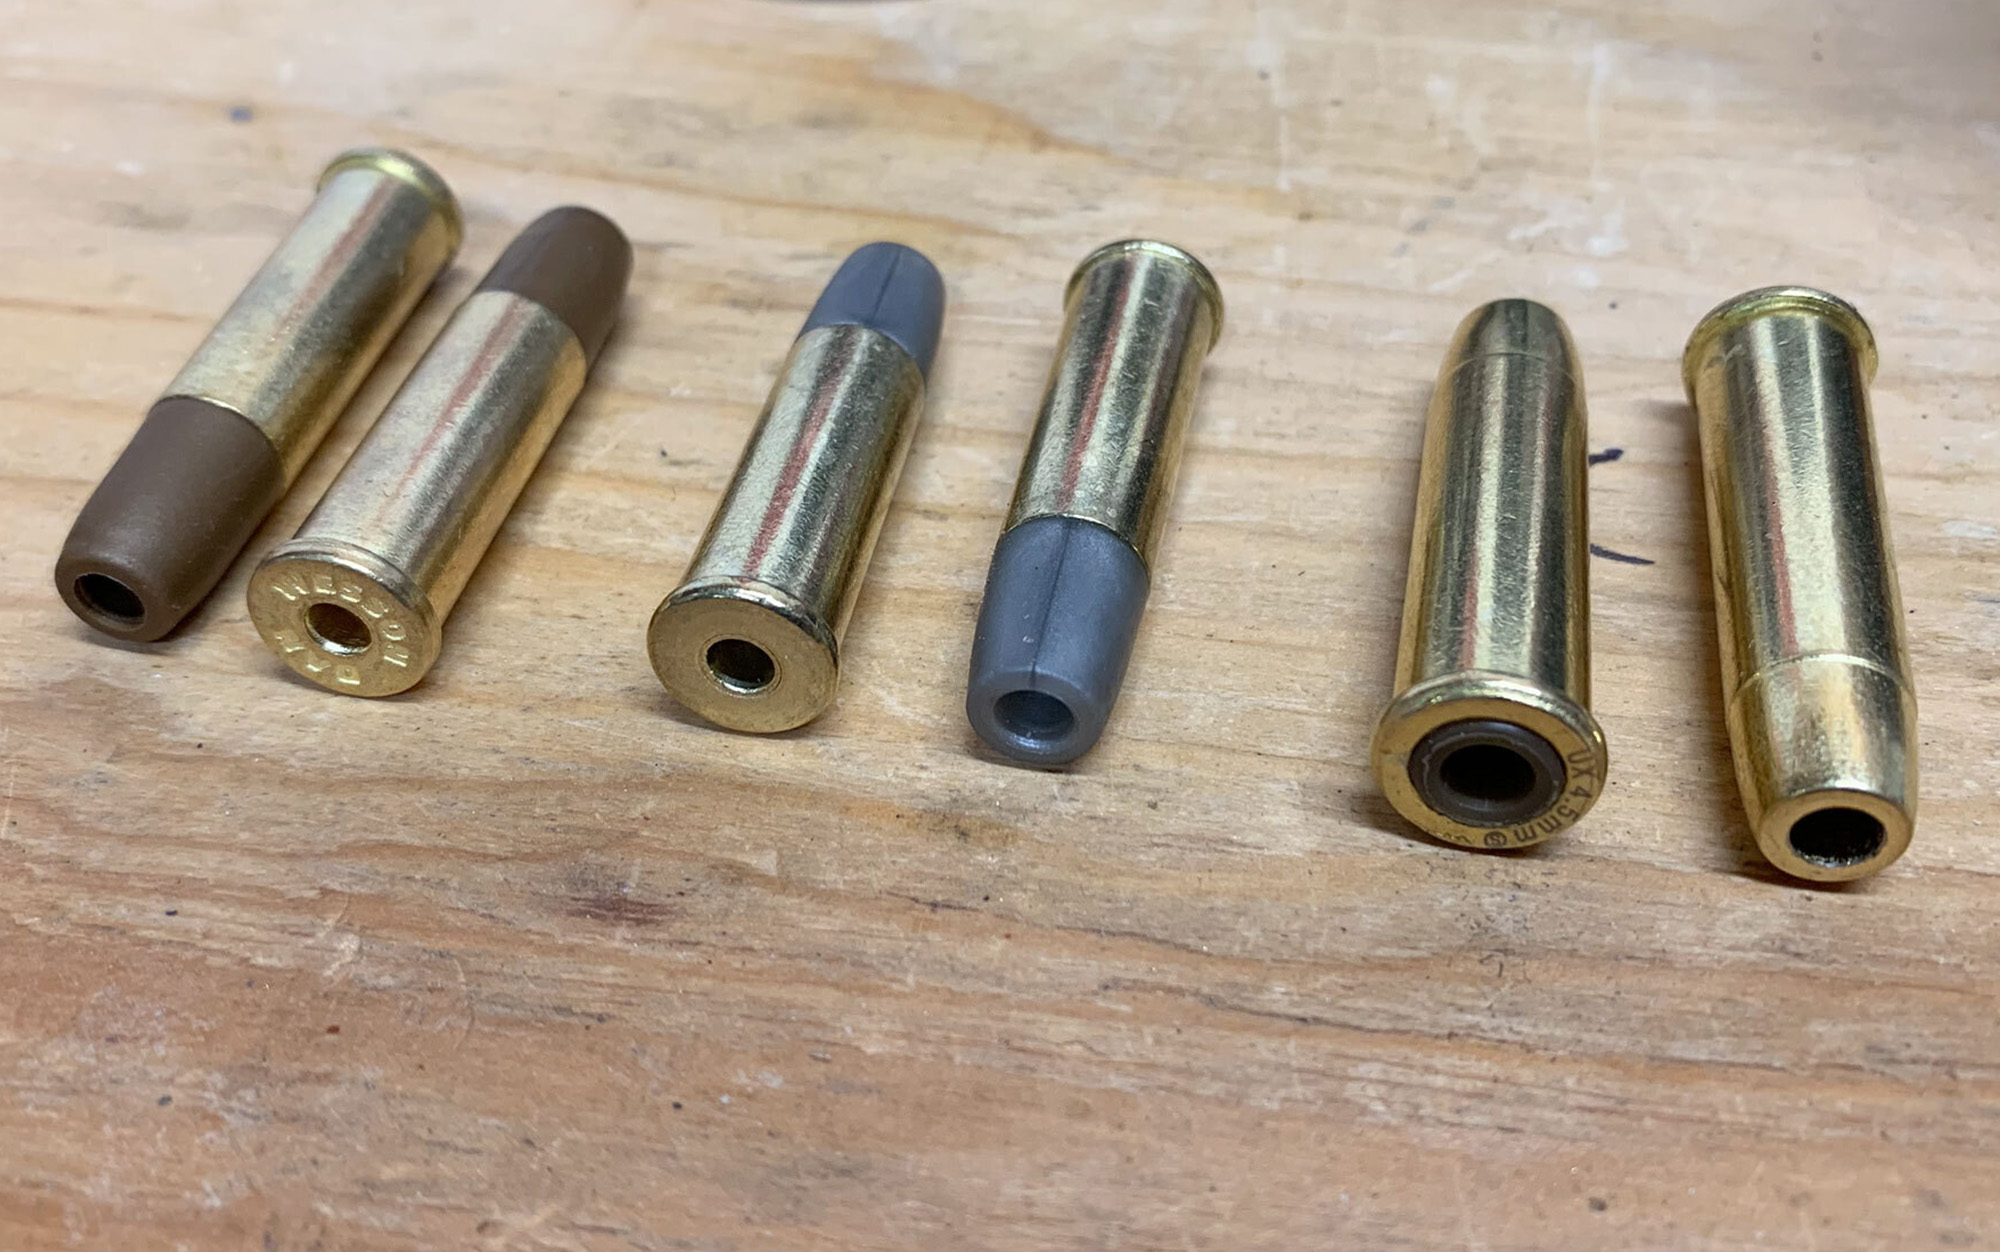 BB revolver cartridges sit on a table.